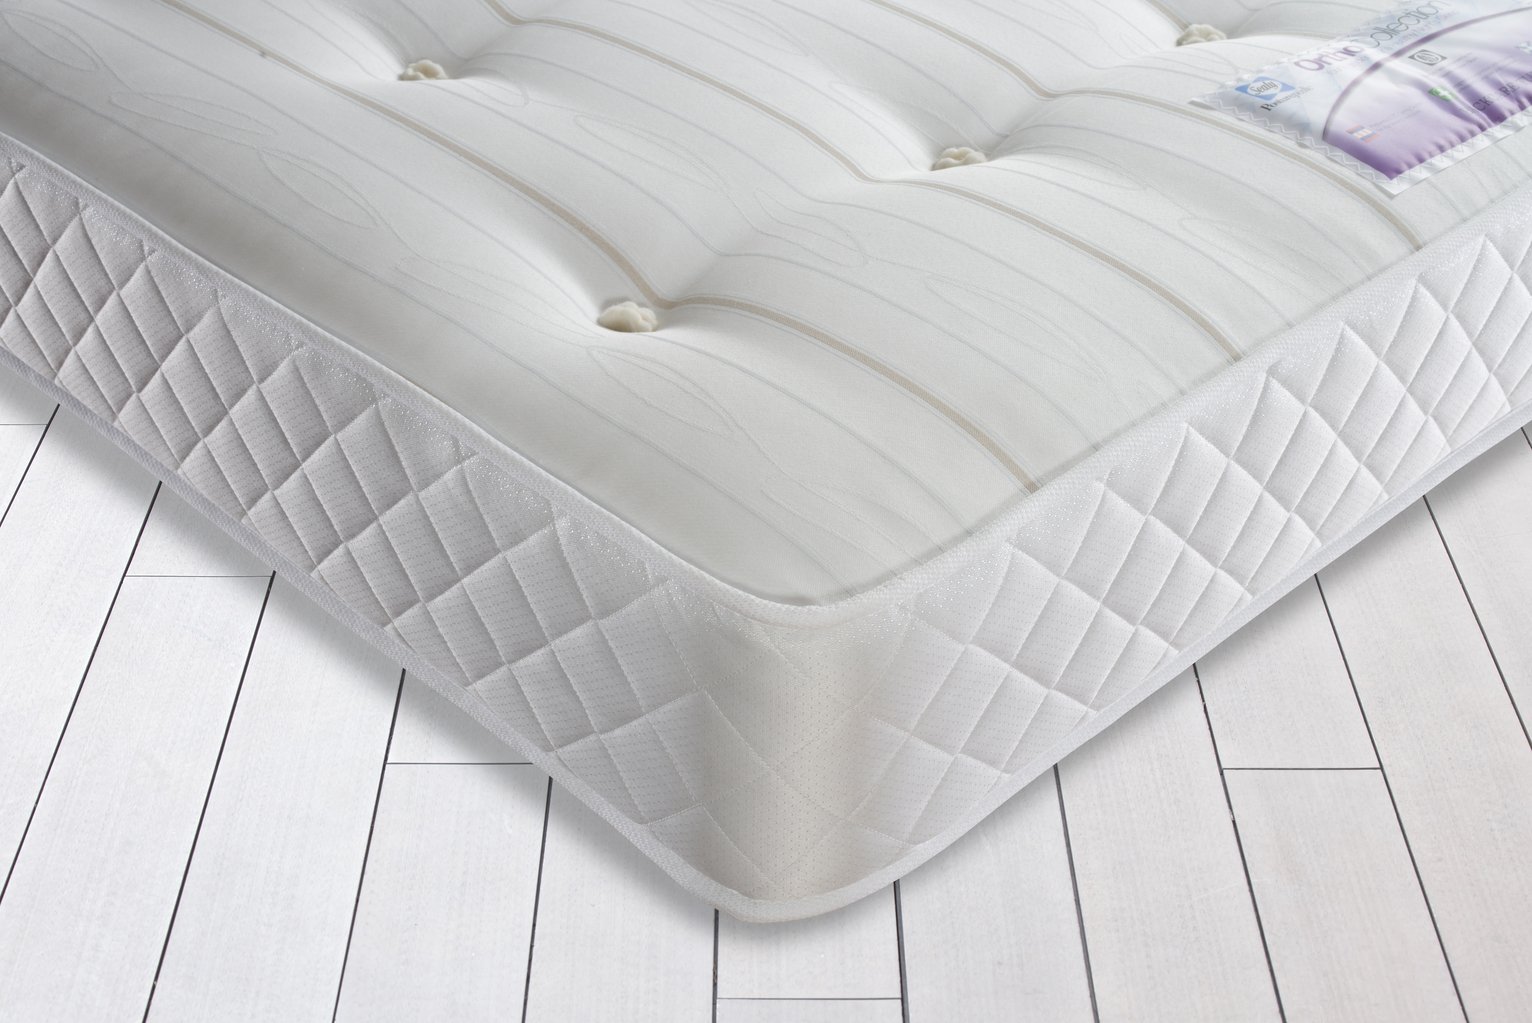 david phillips firm ortho mattress review